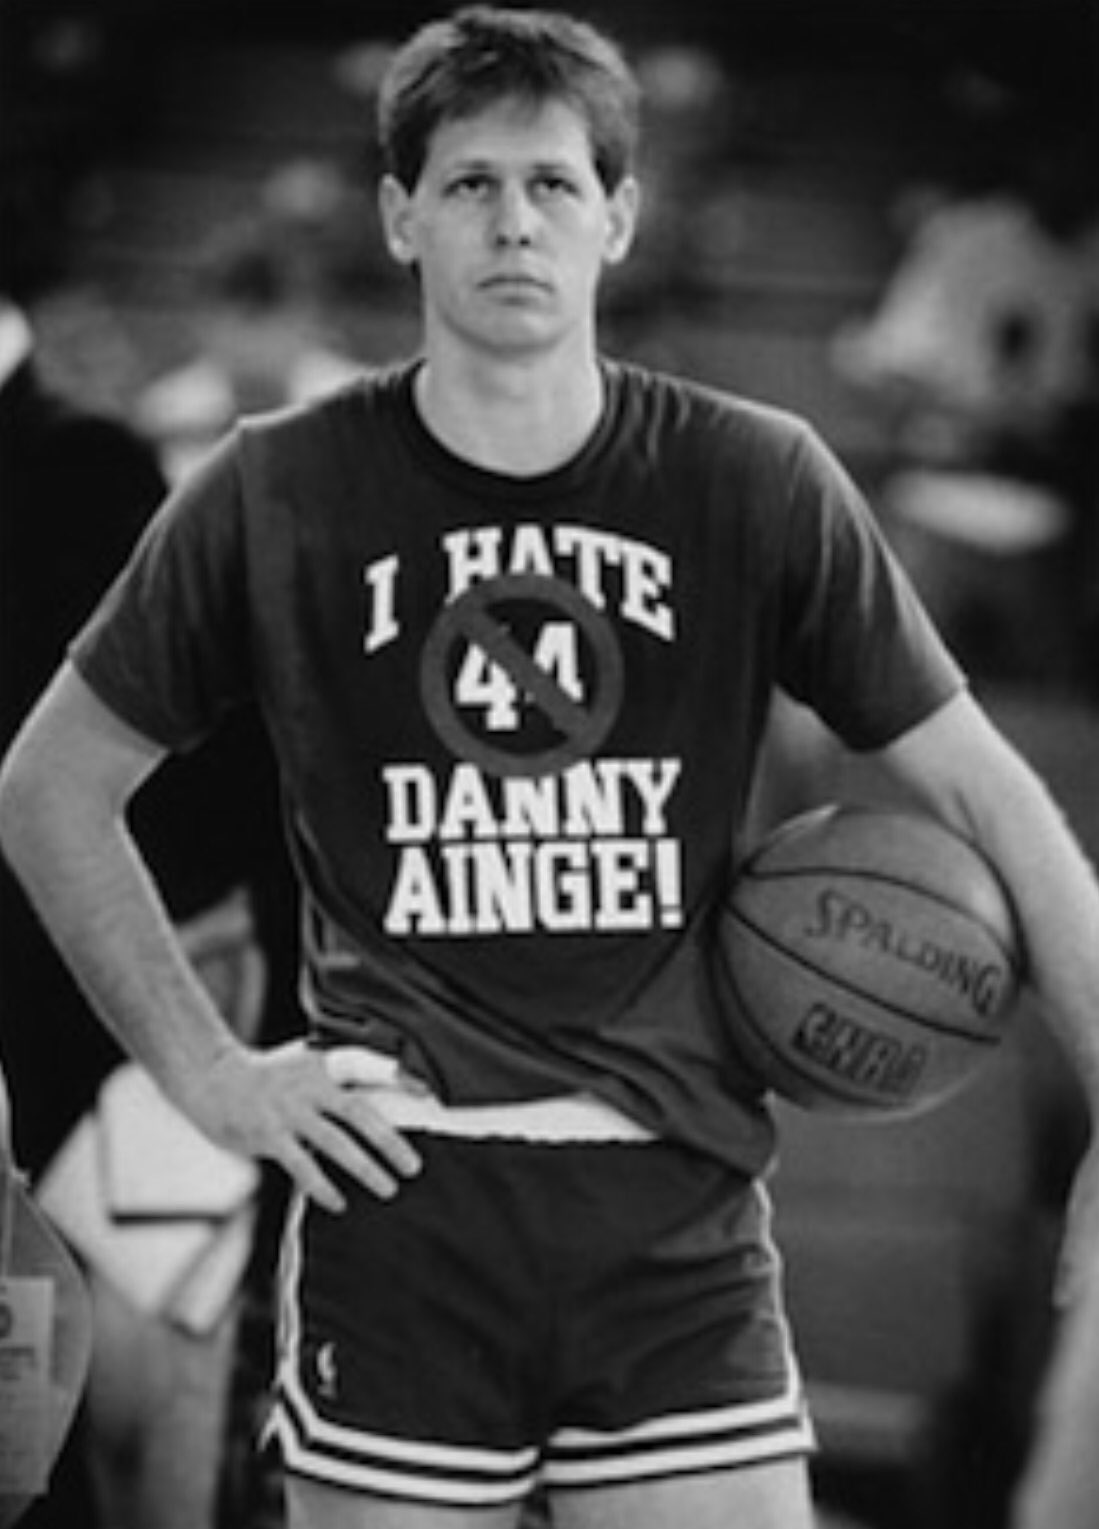 Happy birthday to Danny Ainge! Never forget when he wore an \"I Hate Danny Ainge\" shirt. Classic. 